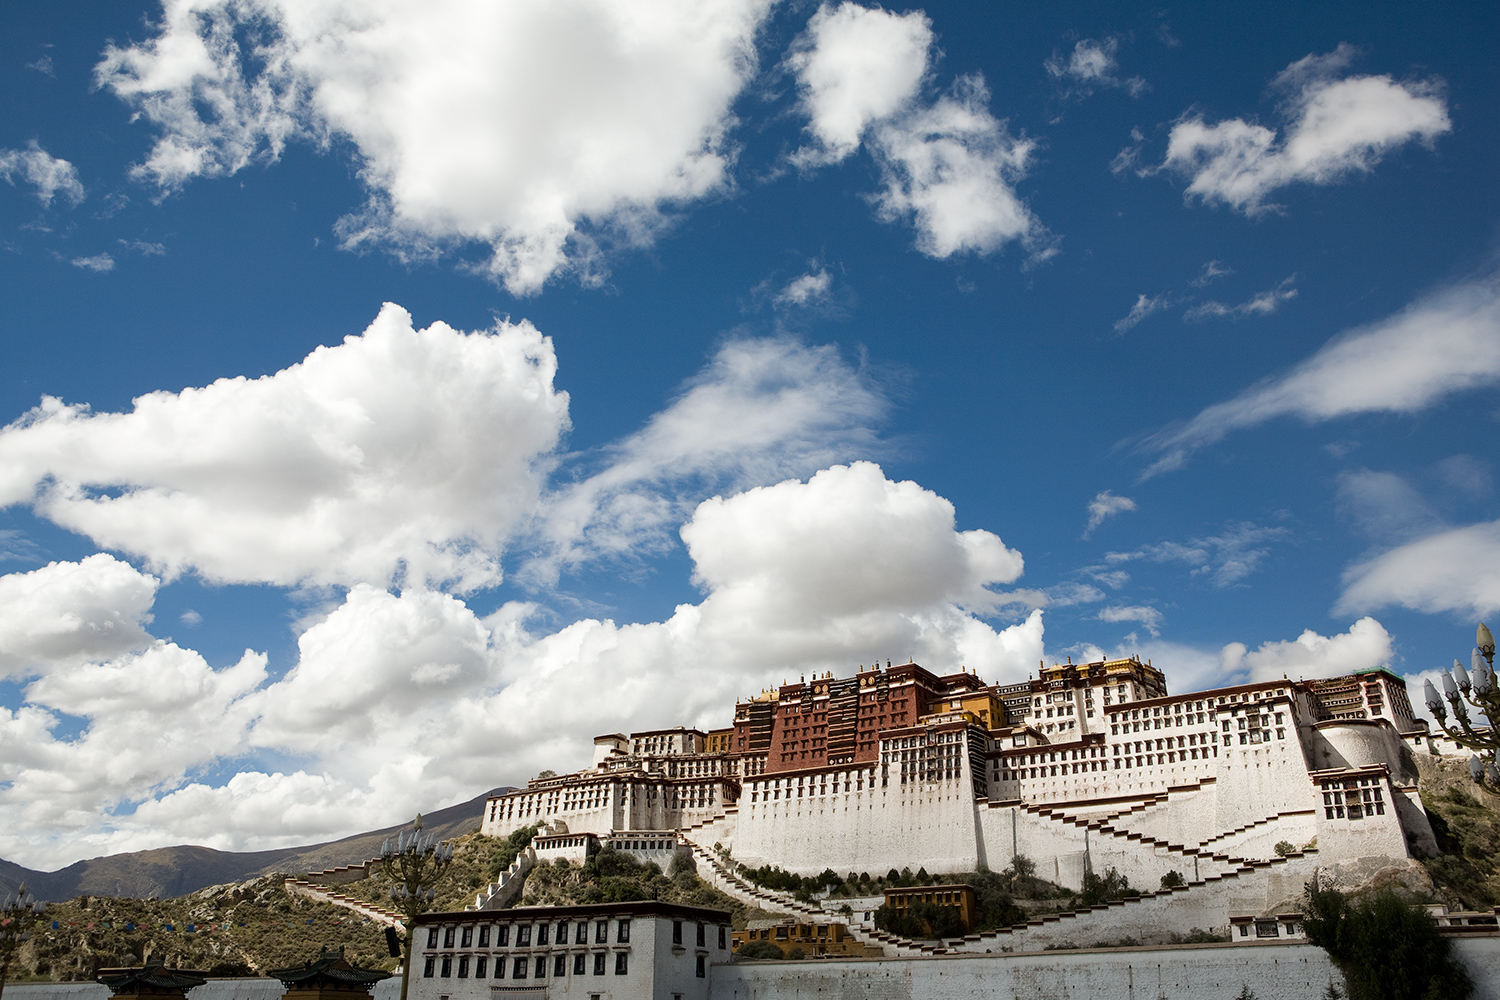  The Potala Palace in Lhasa is where the 14th Dalai Lama would be living if he still lived inside Tibet.  He fled the palace in 1959 for asylum in India.  